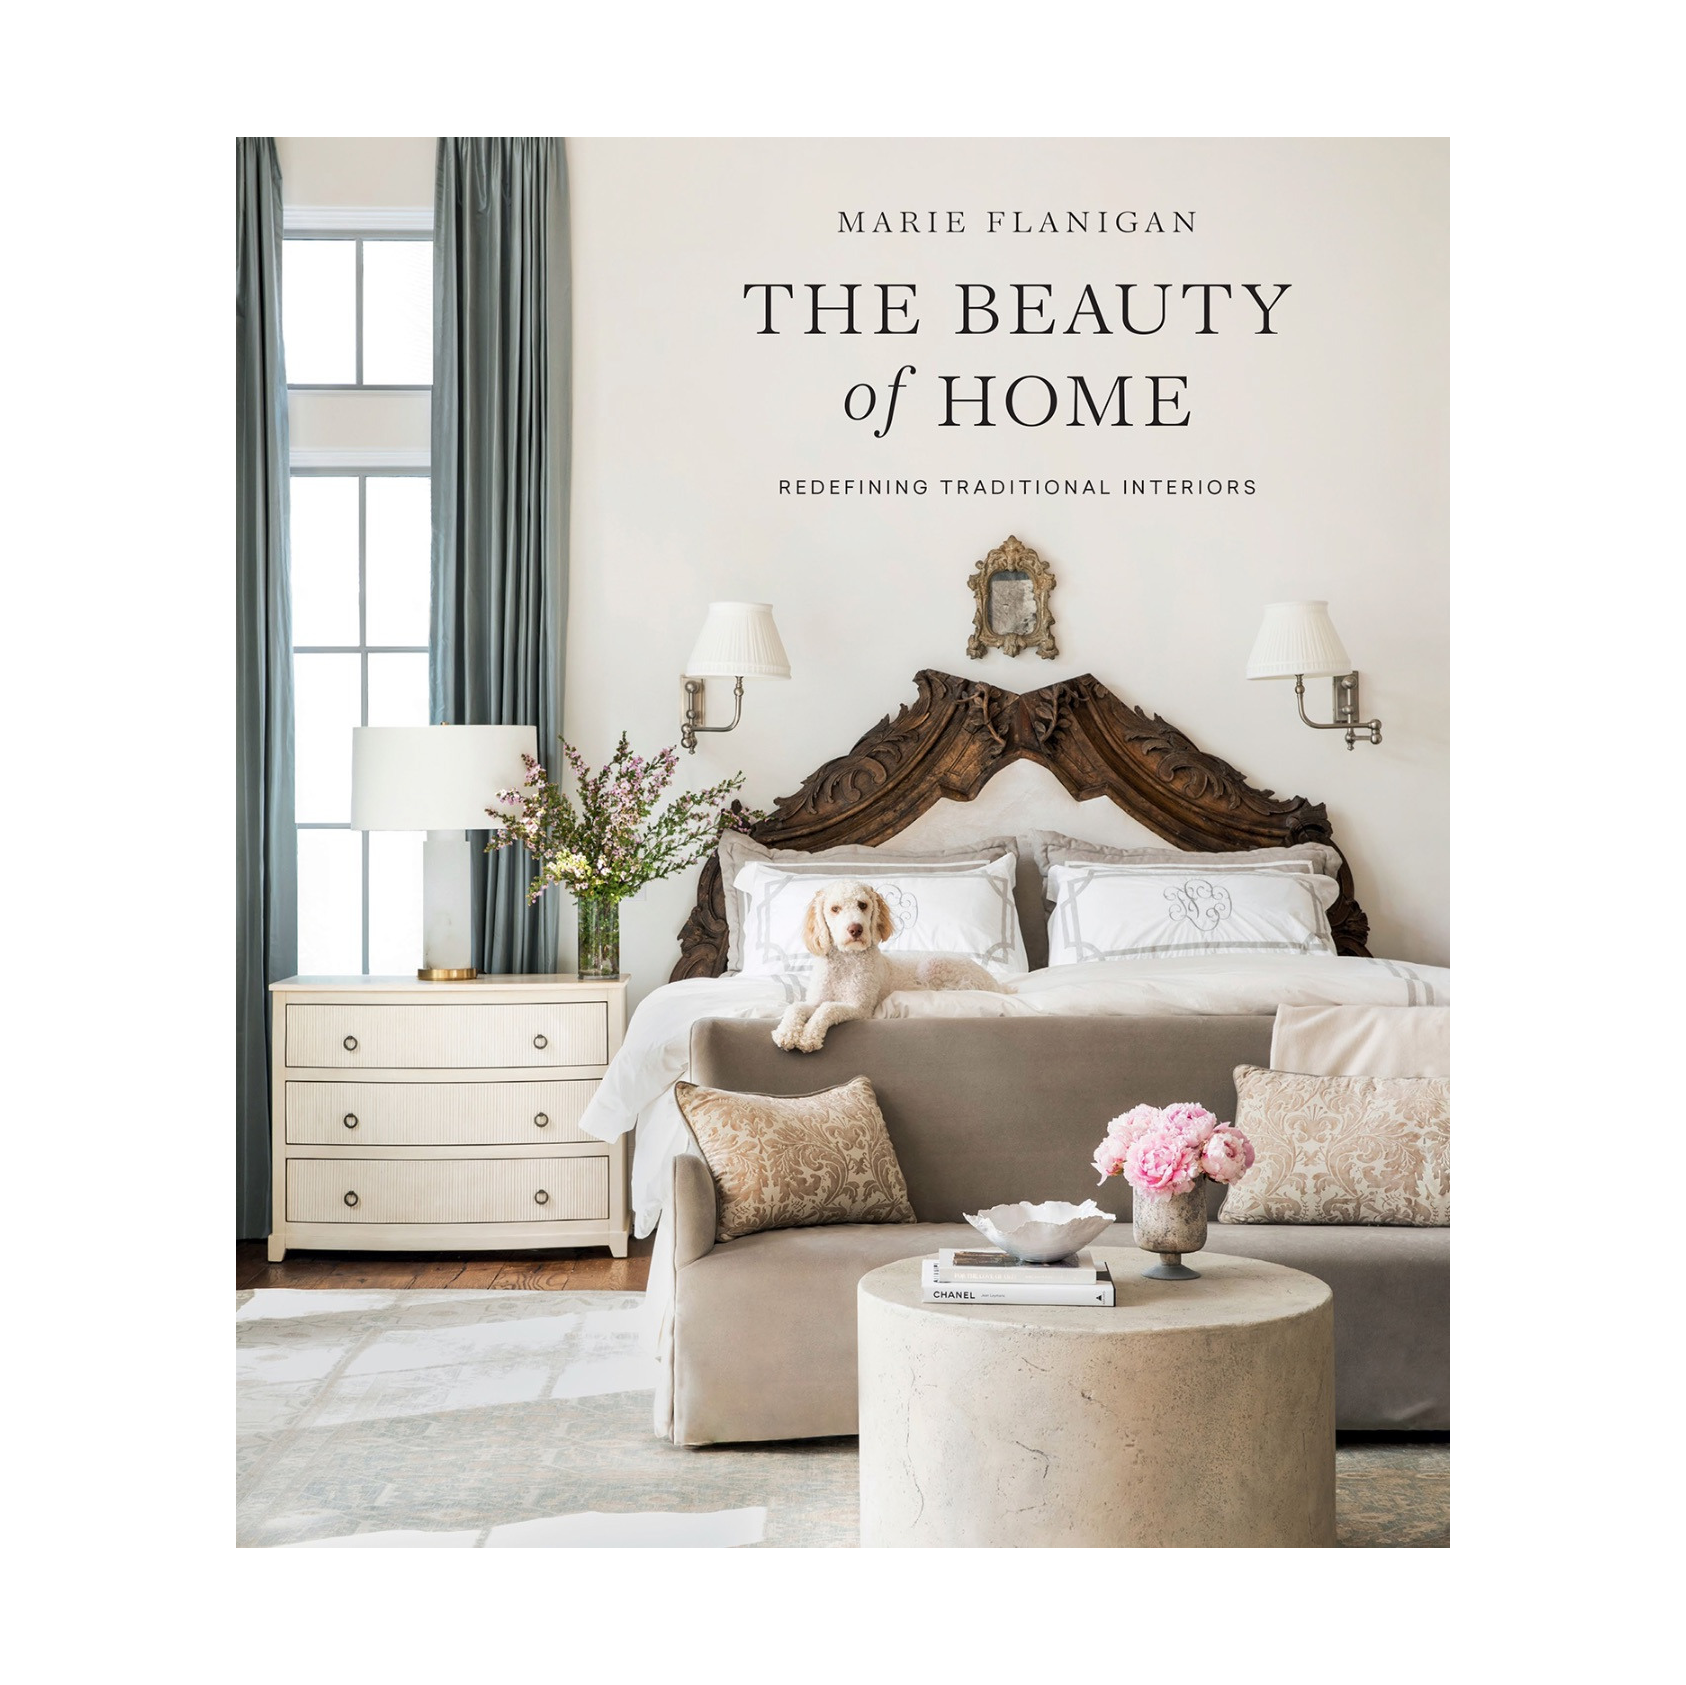 The Beauty of Home by Marie Flanigan